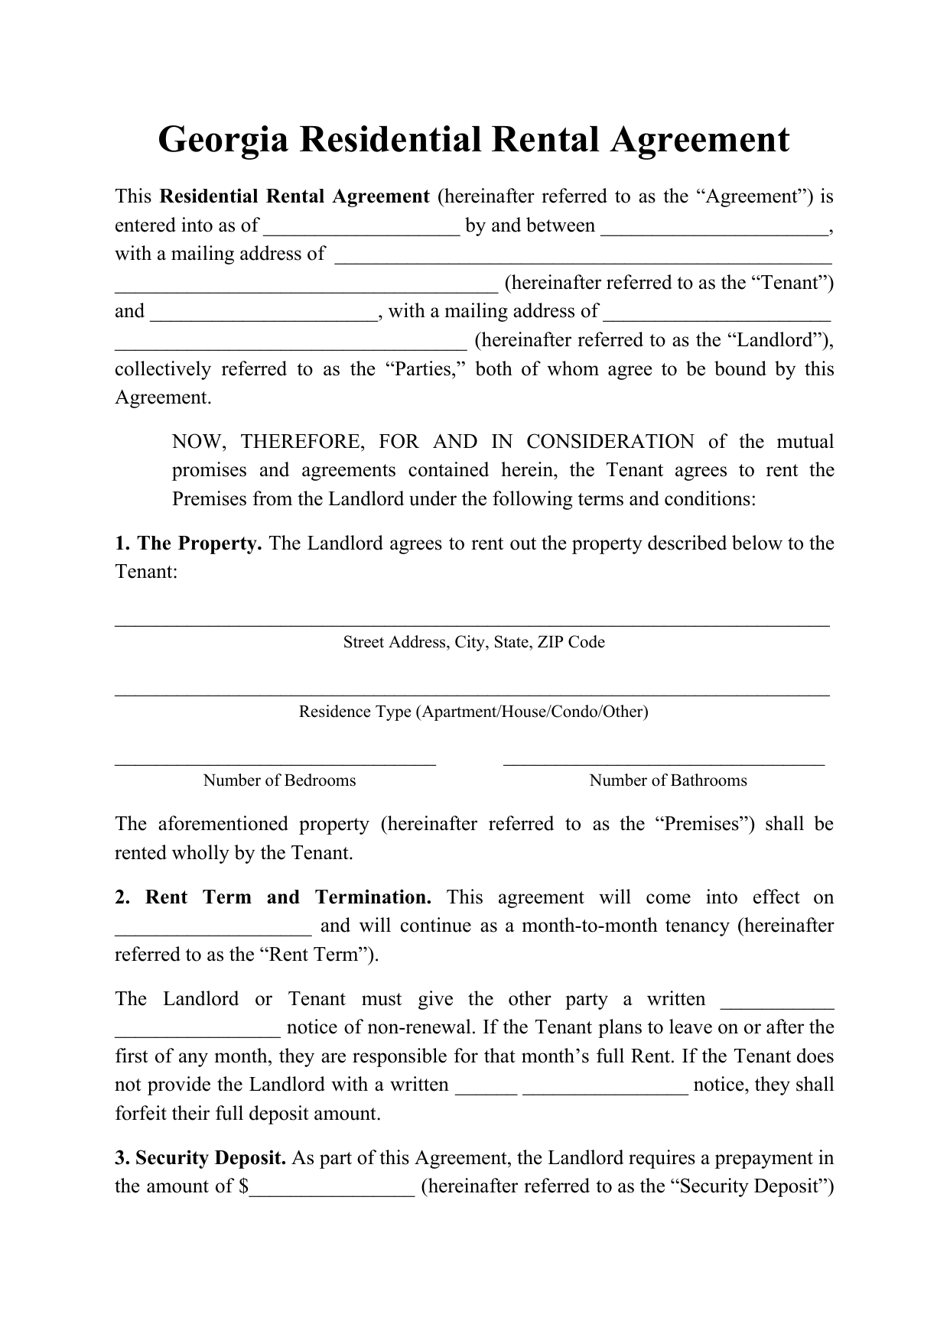 Residential Rental Agreement Template - Georgia (United States), Page 1